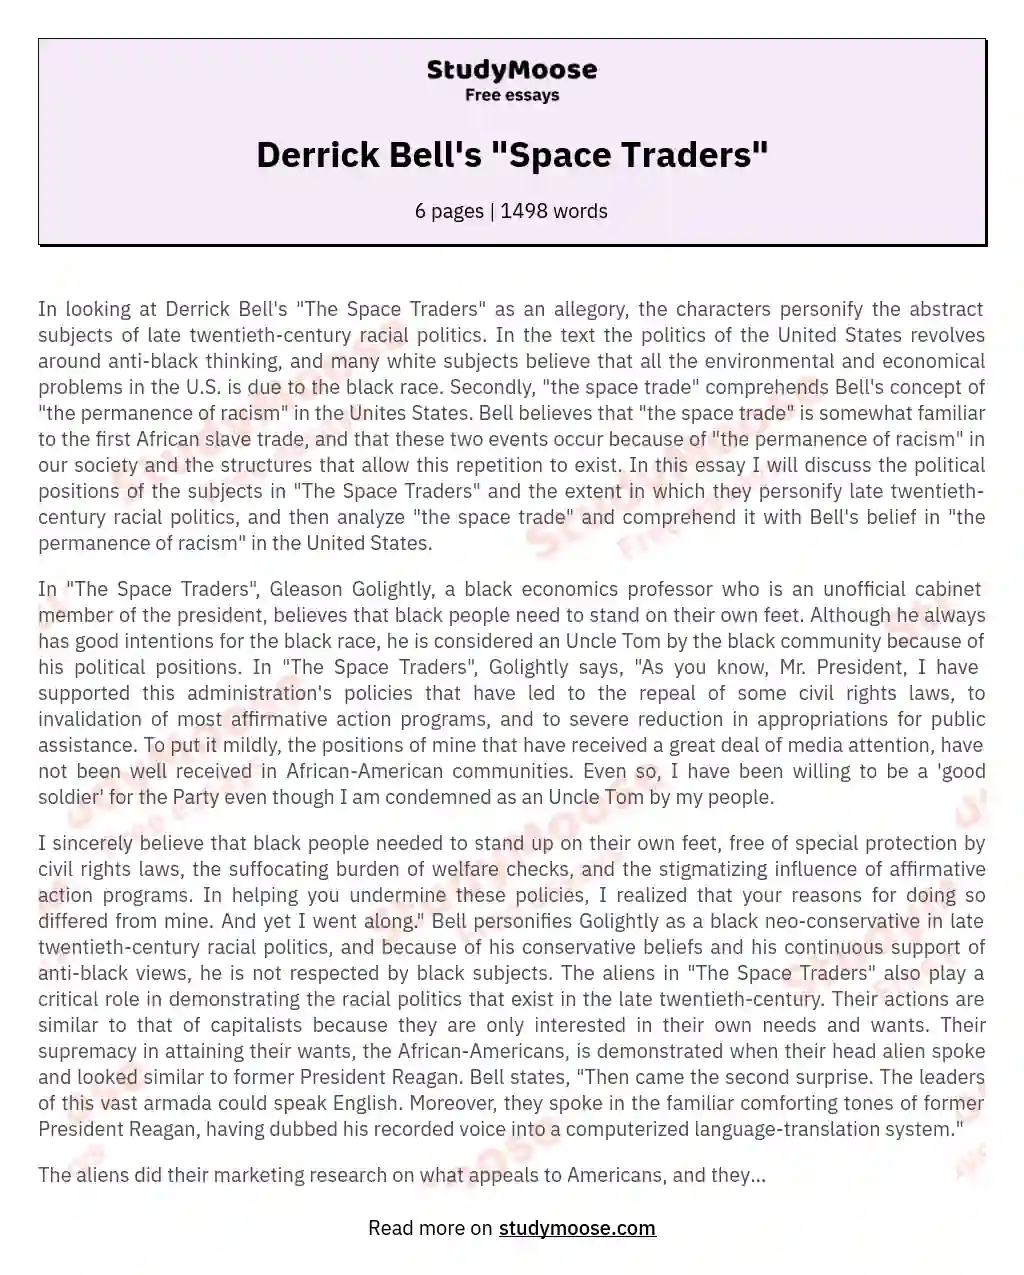 Derrick Bell's "Space Traders" essay